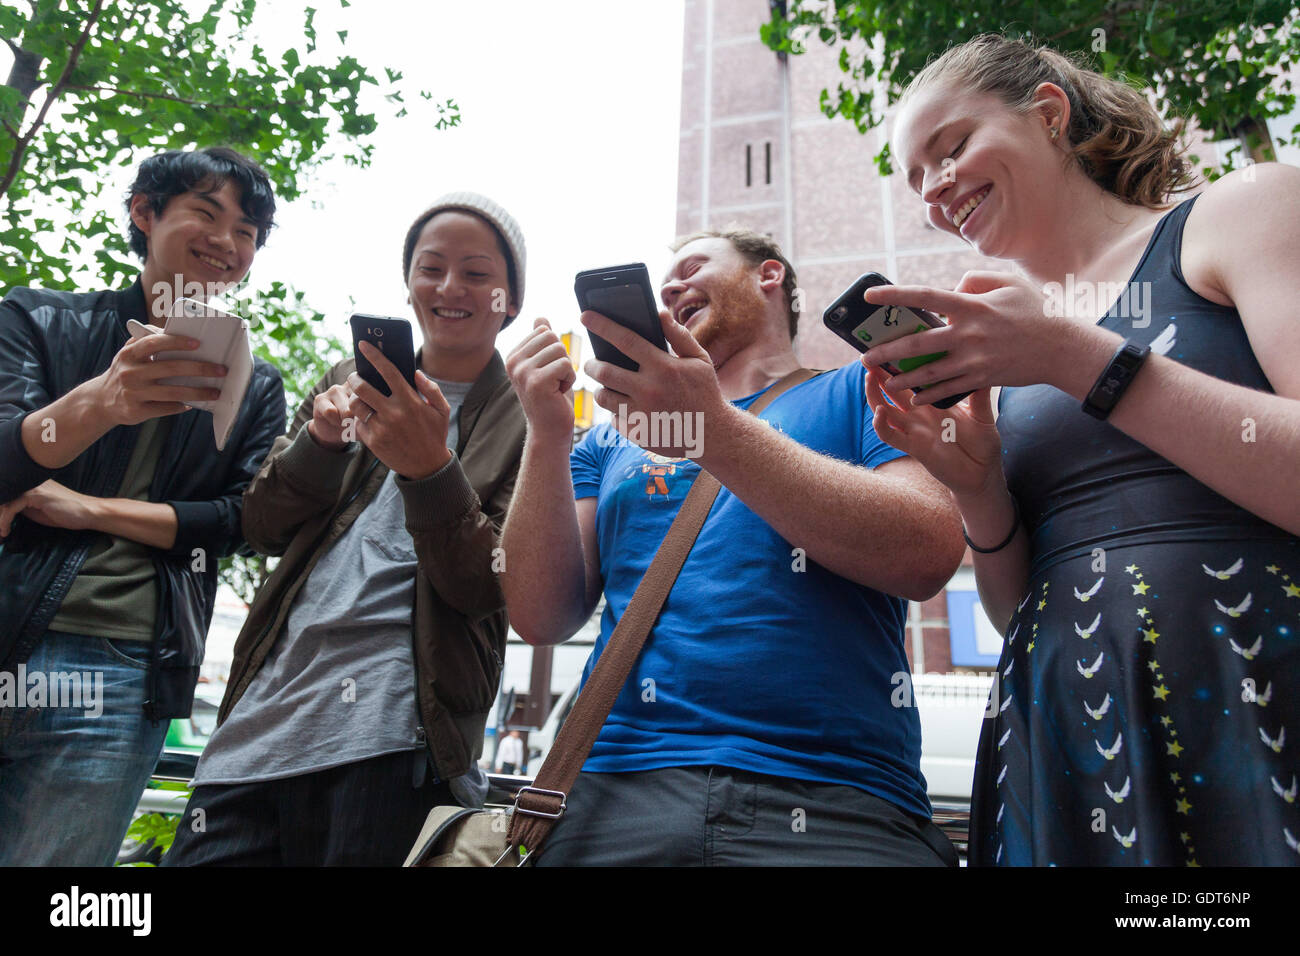 Tokyo, Japan. 22nd July, 2016. Fans try out Pokemon Go in Tokyo's Shinjuku district on July 22, 2016, Tokyo, Japan. The Pokemon Go app finally arrived in the land of the Pokemon on Friday 22, July two weeks after its launch in the United States. The release of the app in Japan had been rumoured for the past few days after the leak of details of a partnership deal with McDonalds Japan to create Pokemon Gyms in its 3,000 locations. Nintendo's market value has almost doubled since the app created by Niantic first launched in America. © Rodrigo Reyes Marin/AFLO/Alamy Live News Credit:  Aflo Co. Lt Stock Photo